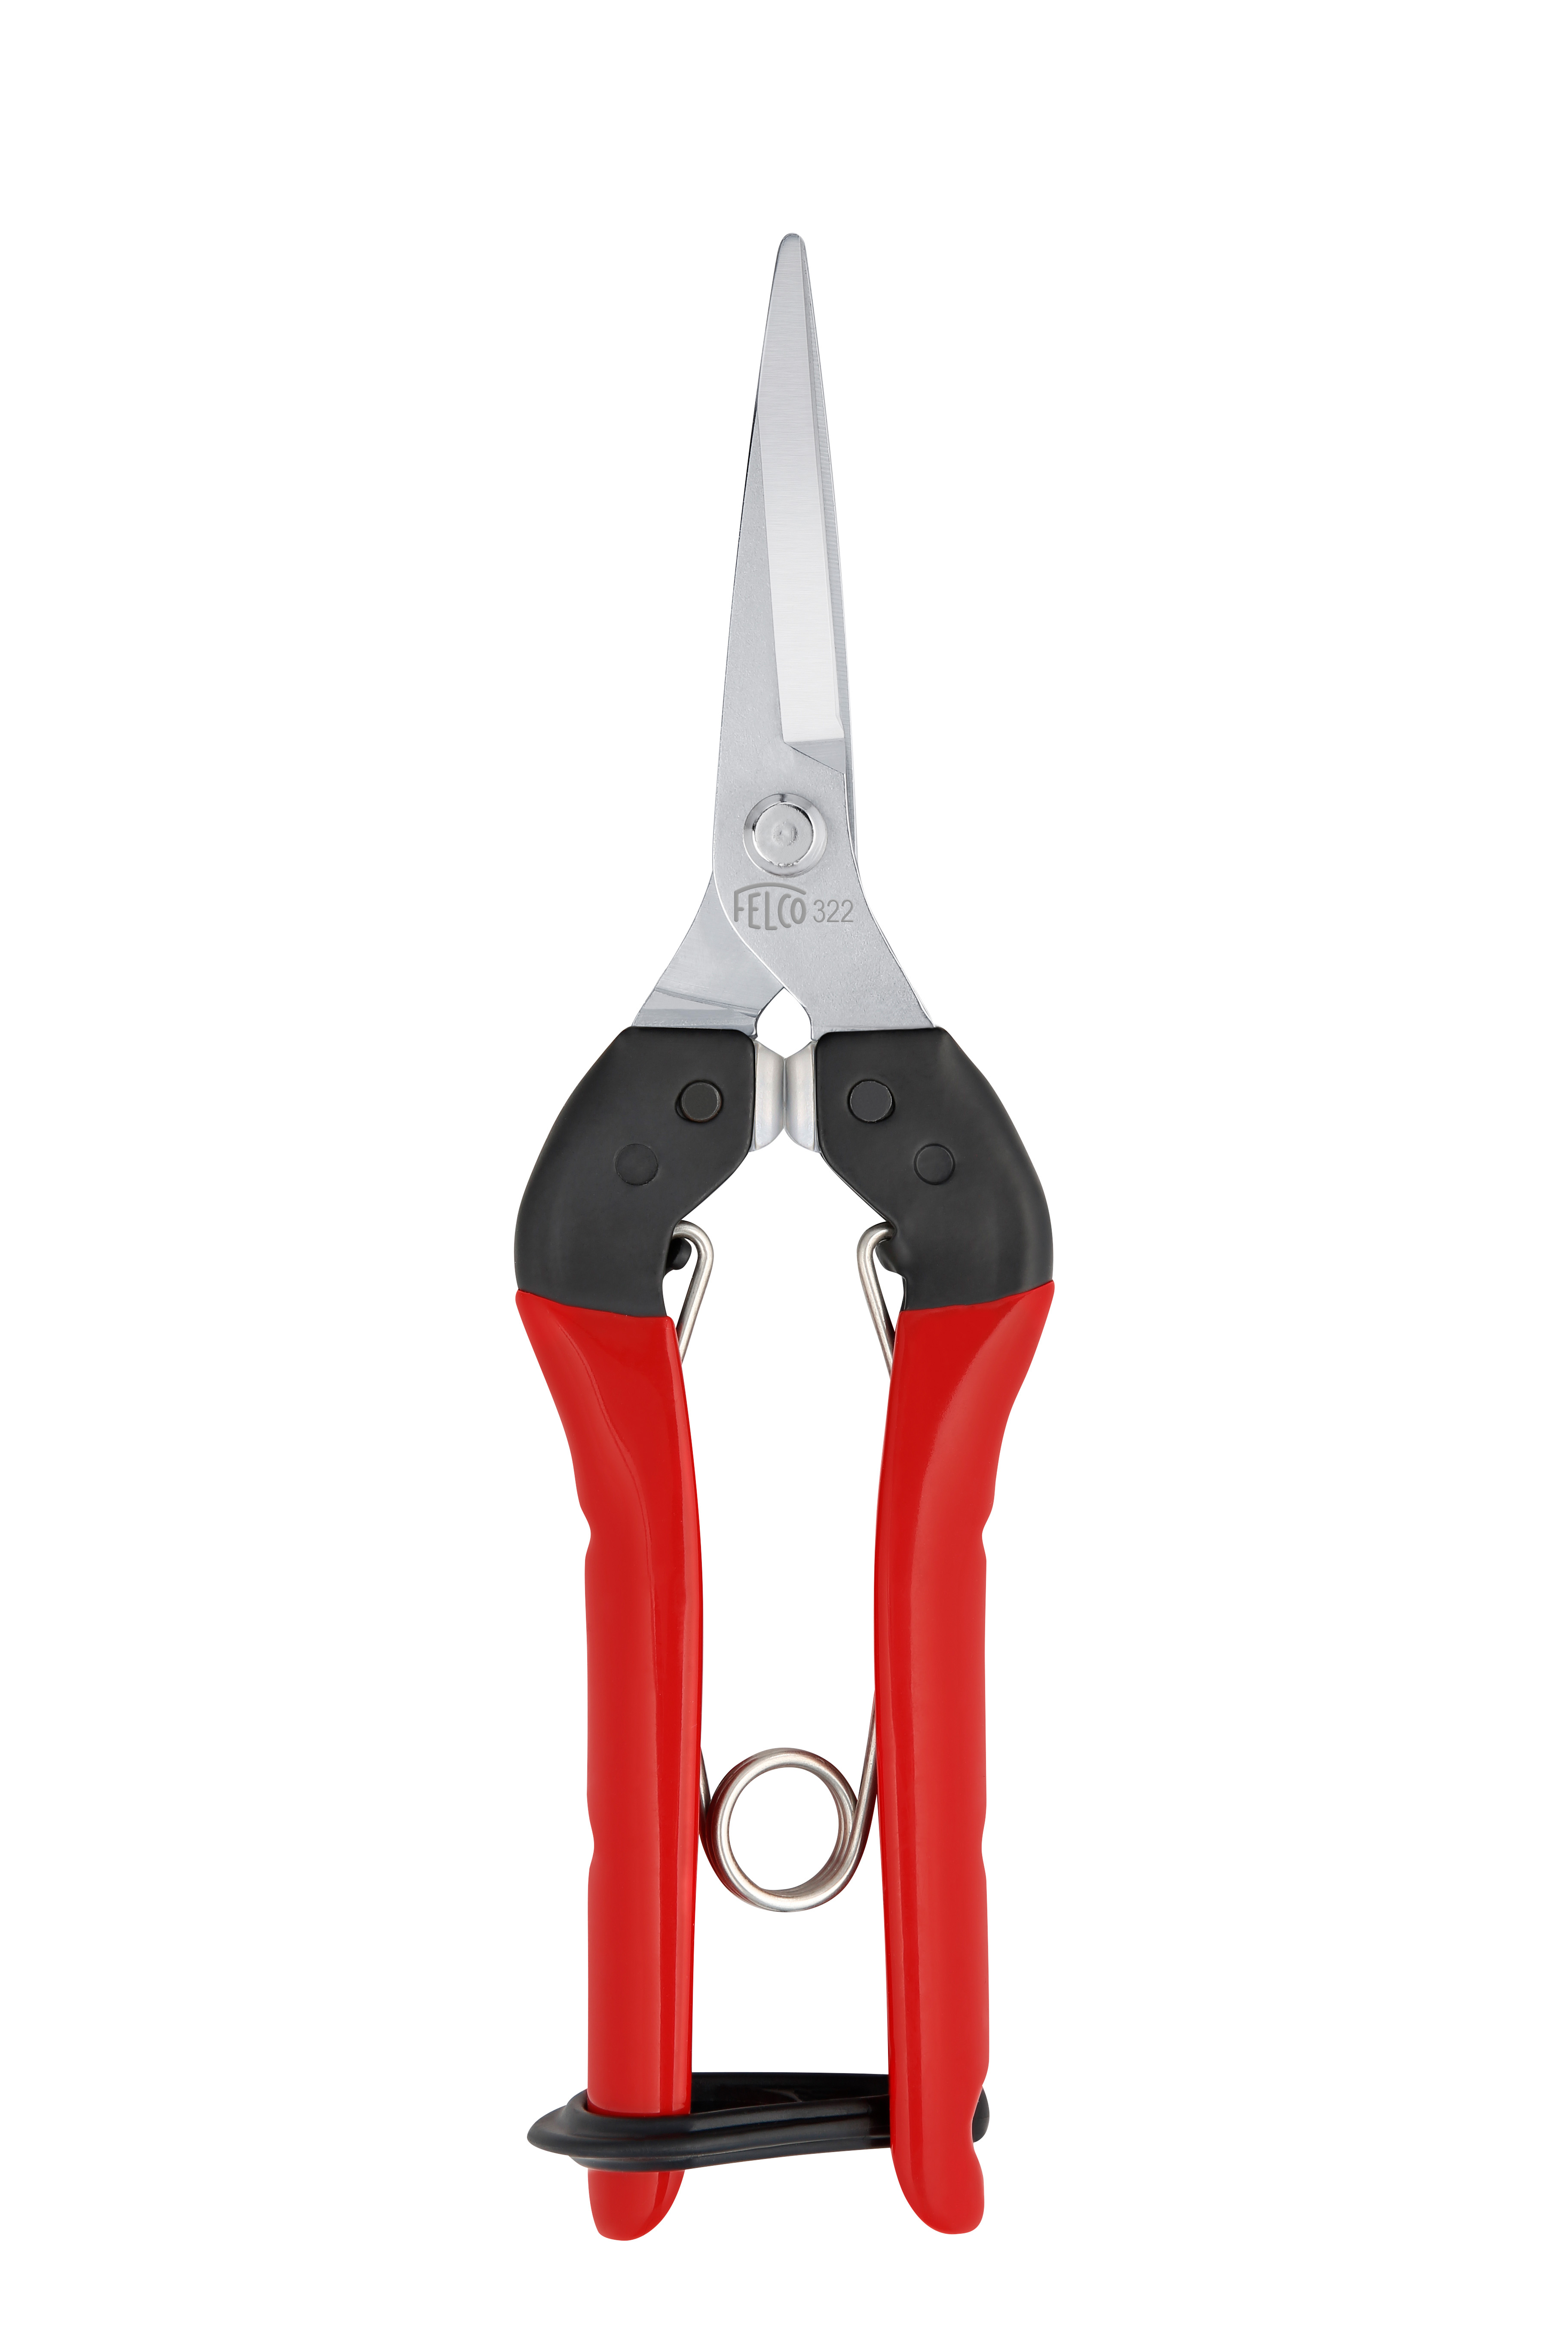 Felco 322 - picking and trimming snips 